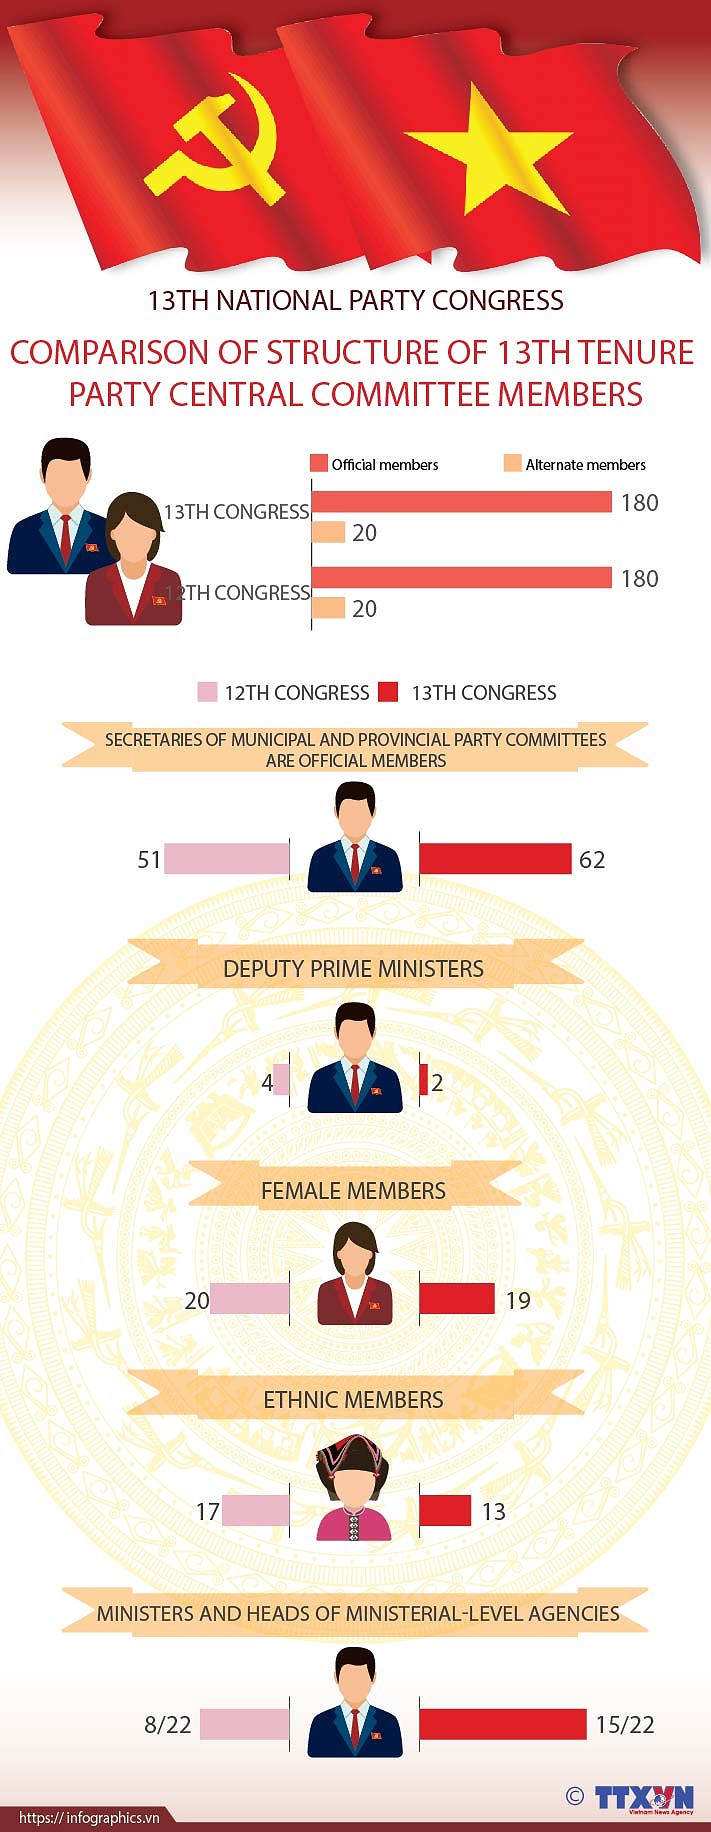 Comparison of structure of 13th tenure Party Central Committee members hinh anh 1